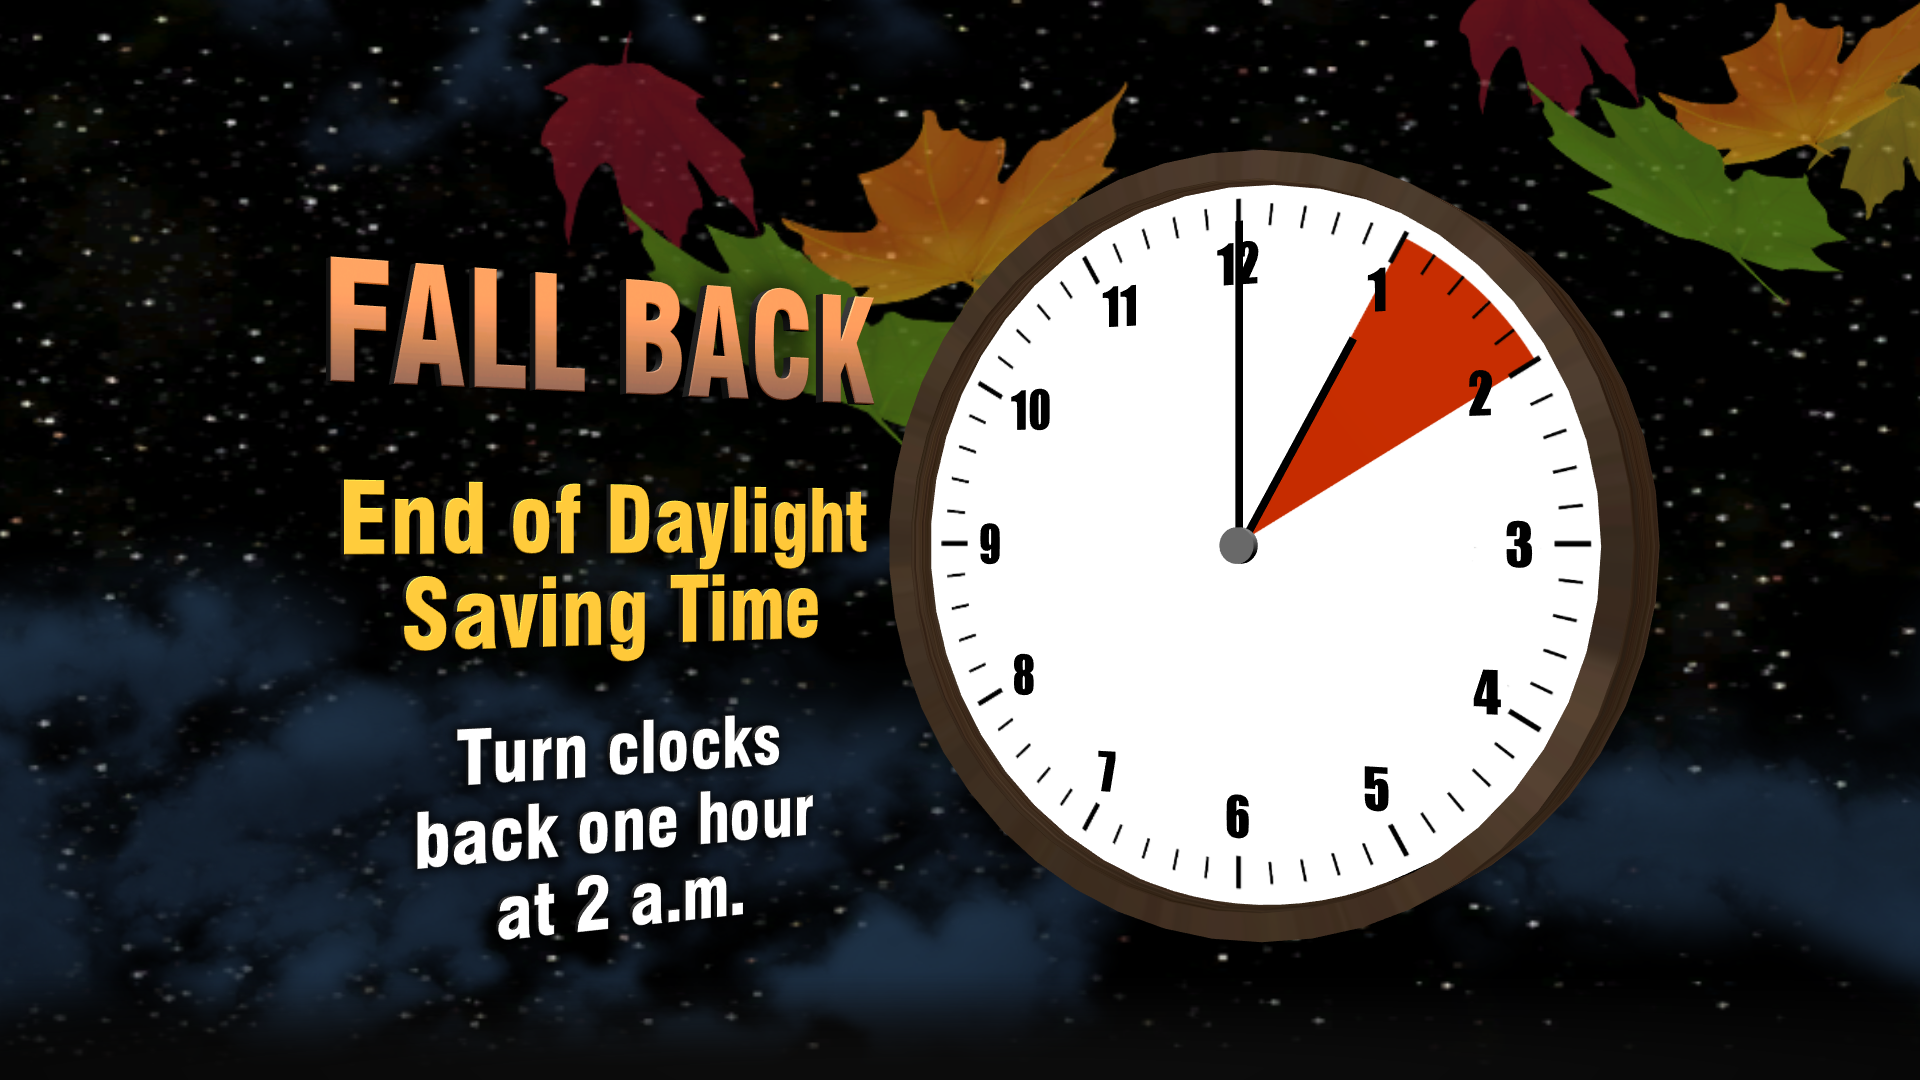 We Have Been Experiencing Daylight Saving Time Since March 11 But